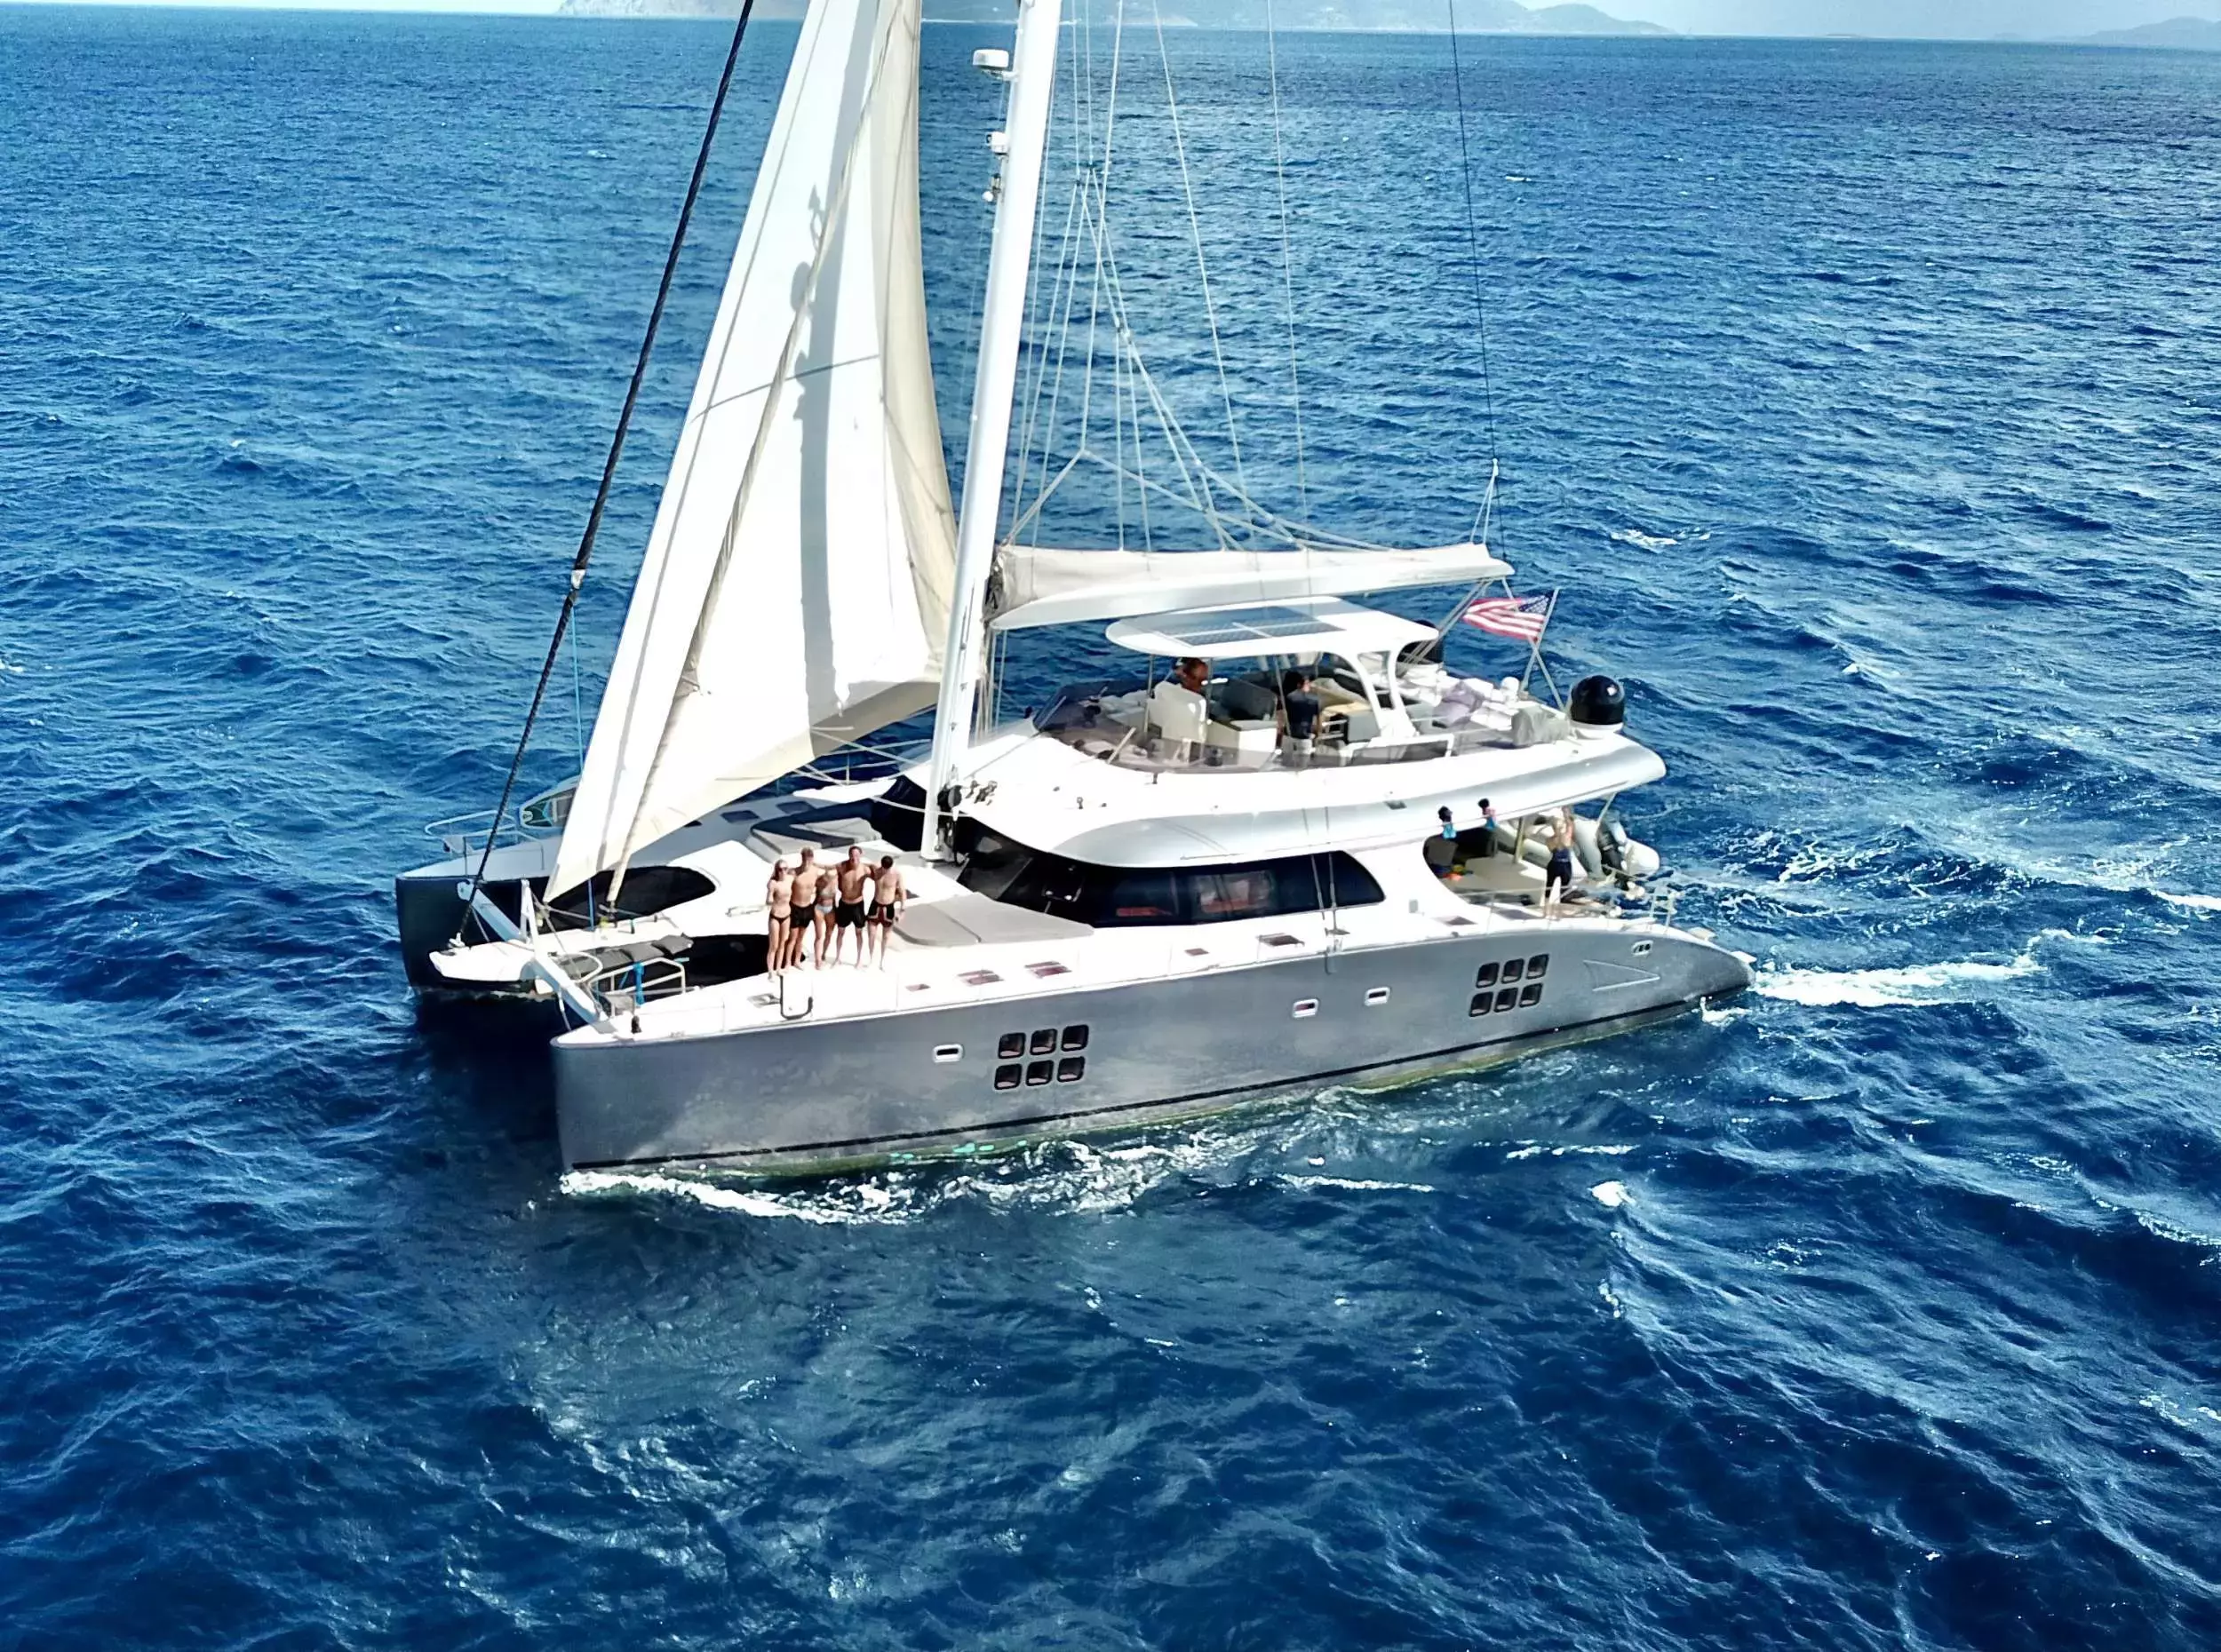 Excess by Sunreef Yachts - Top rates for a Charter of a private Luxury Catamaran in British Virgin Islands